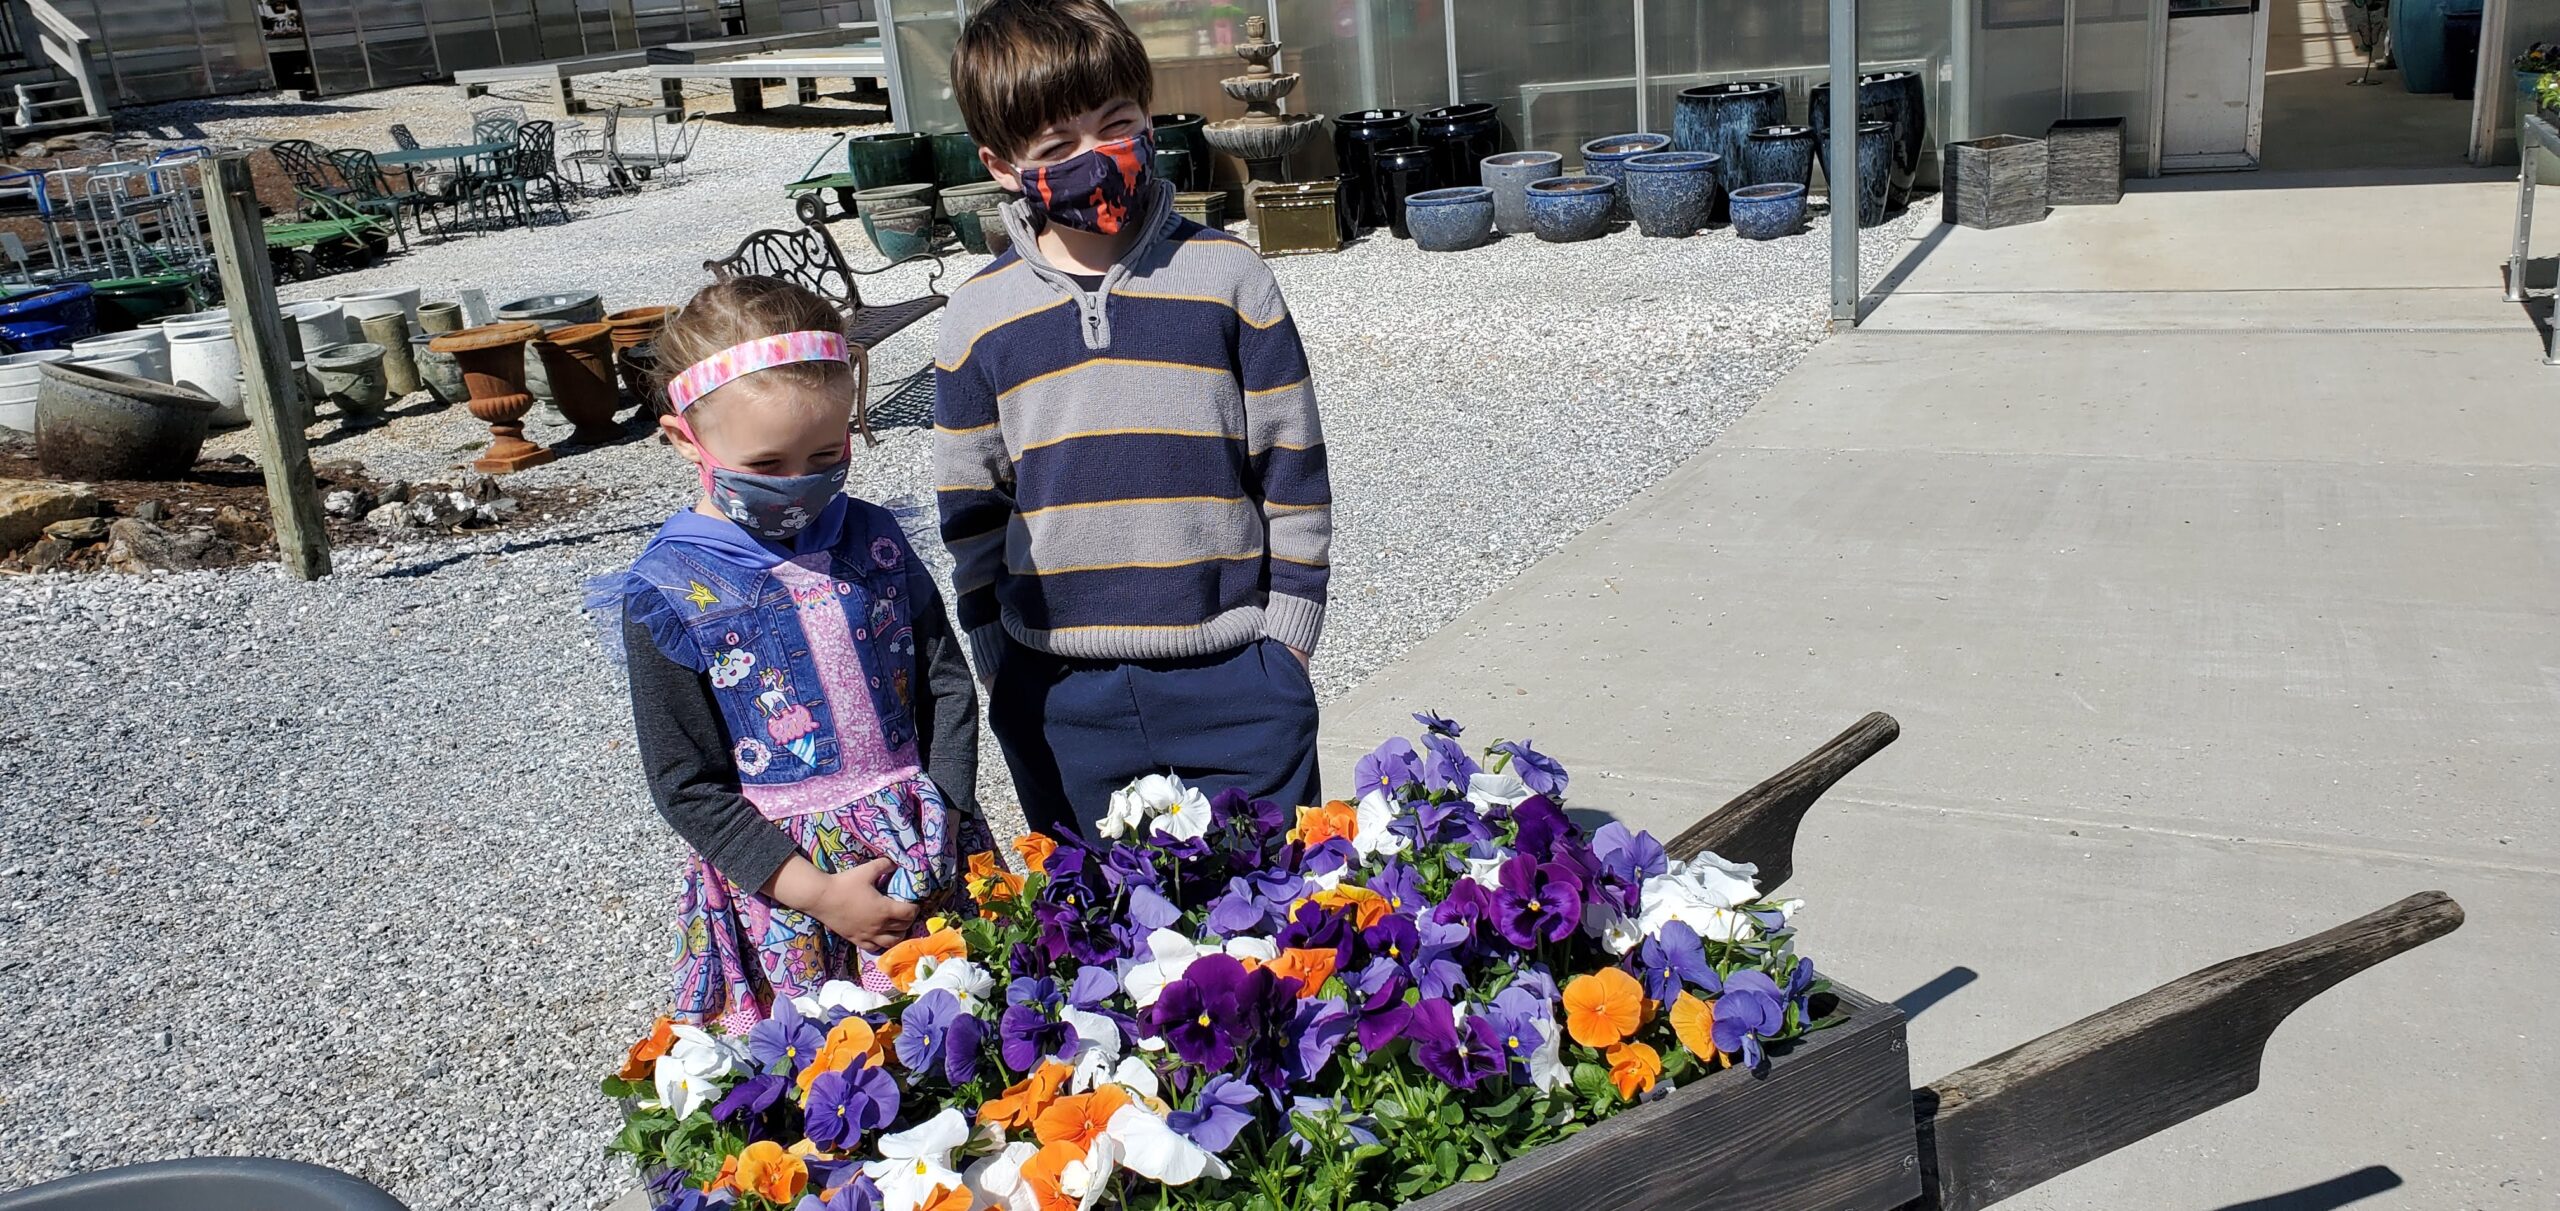 Aaron and Zoe looking at pansies at Snell's Greenhouses